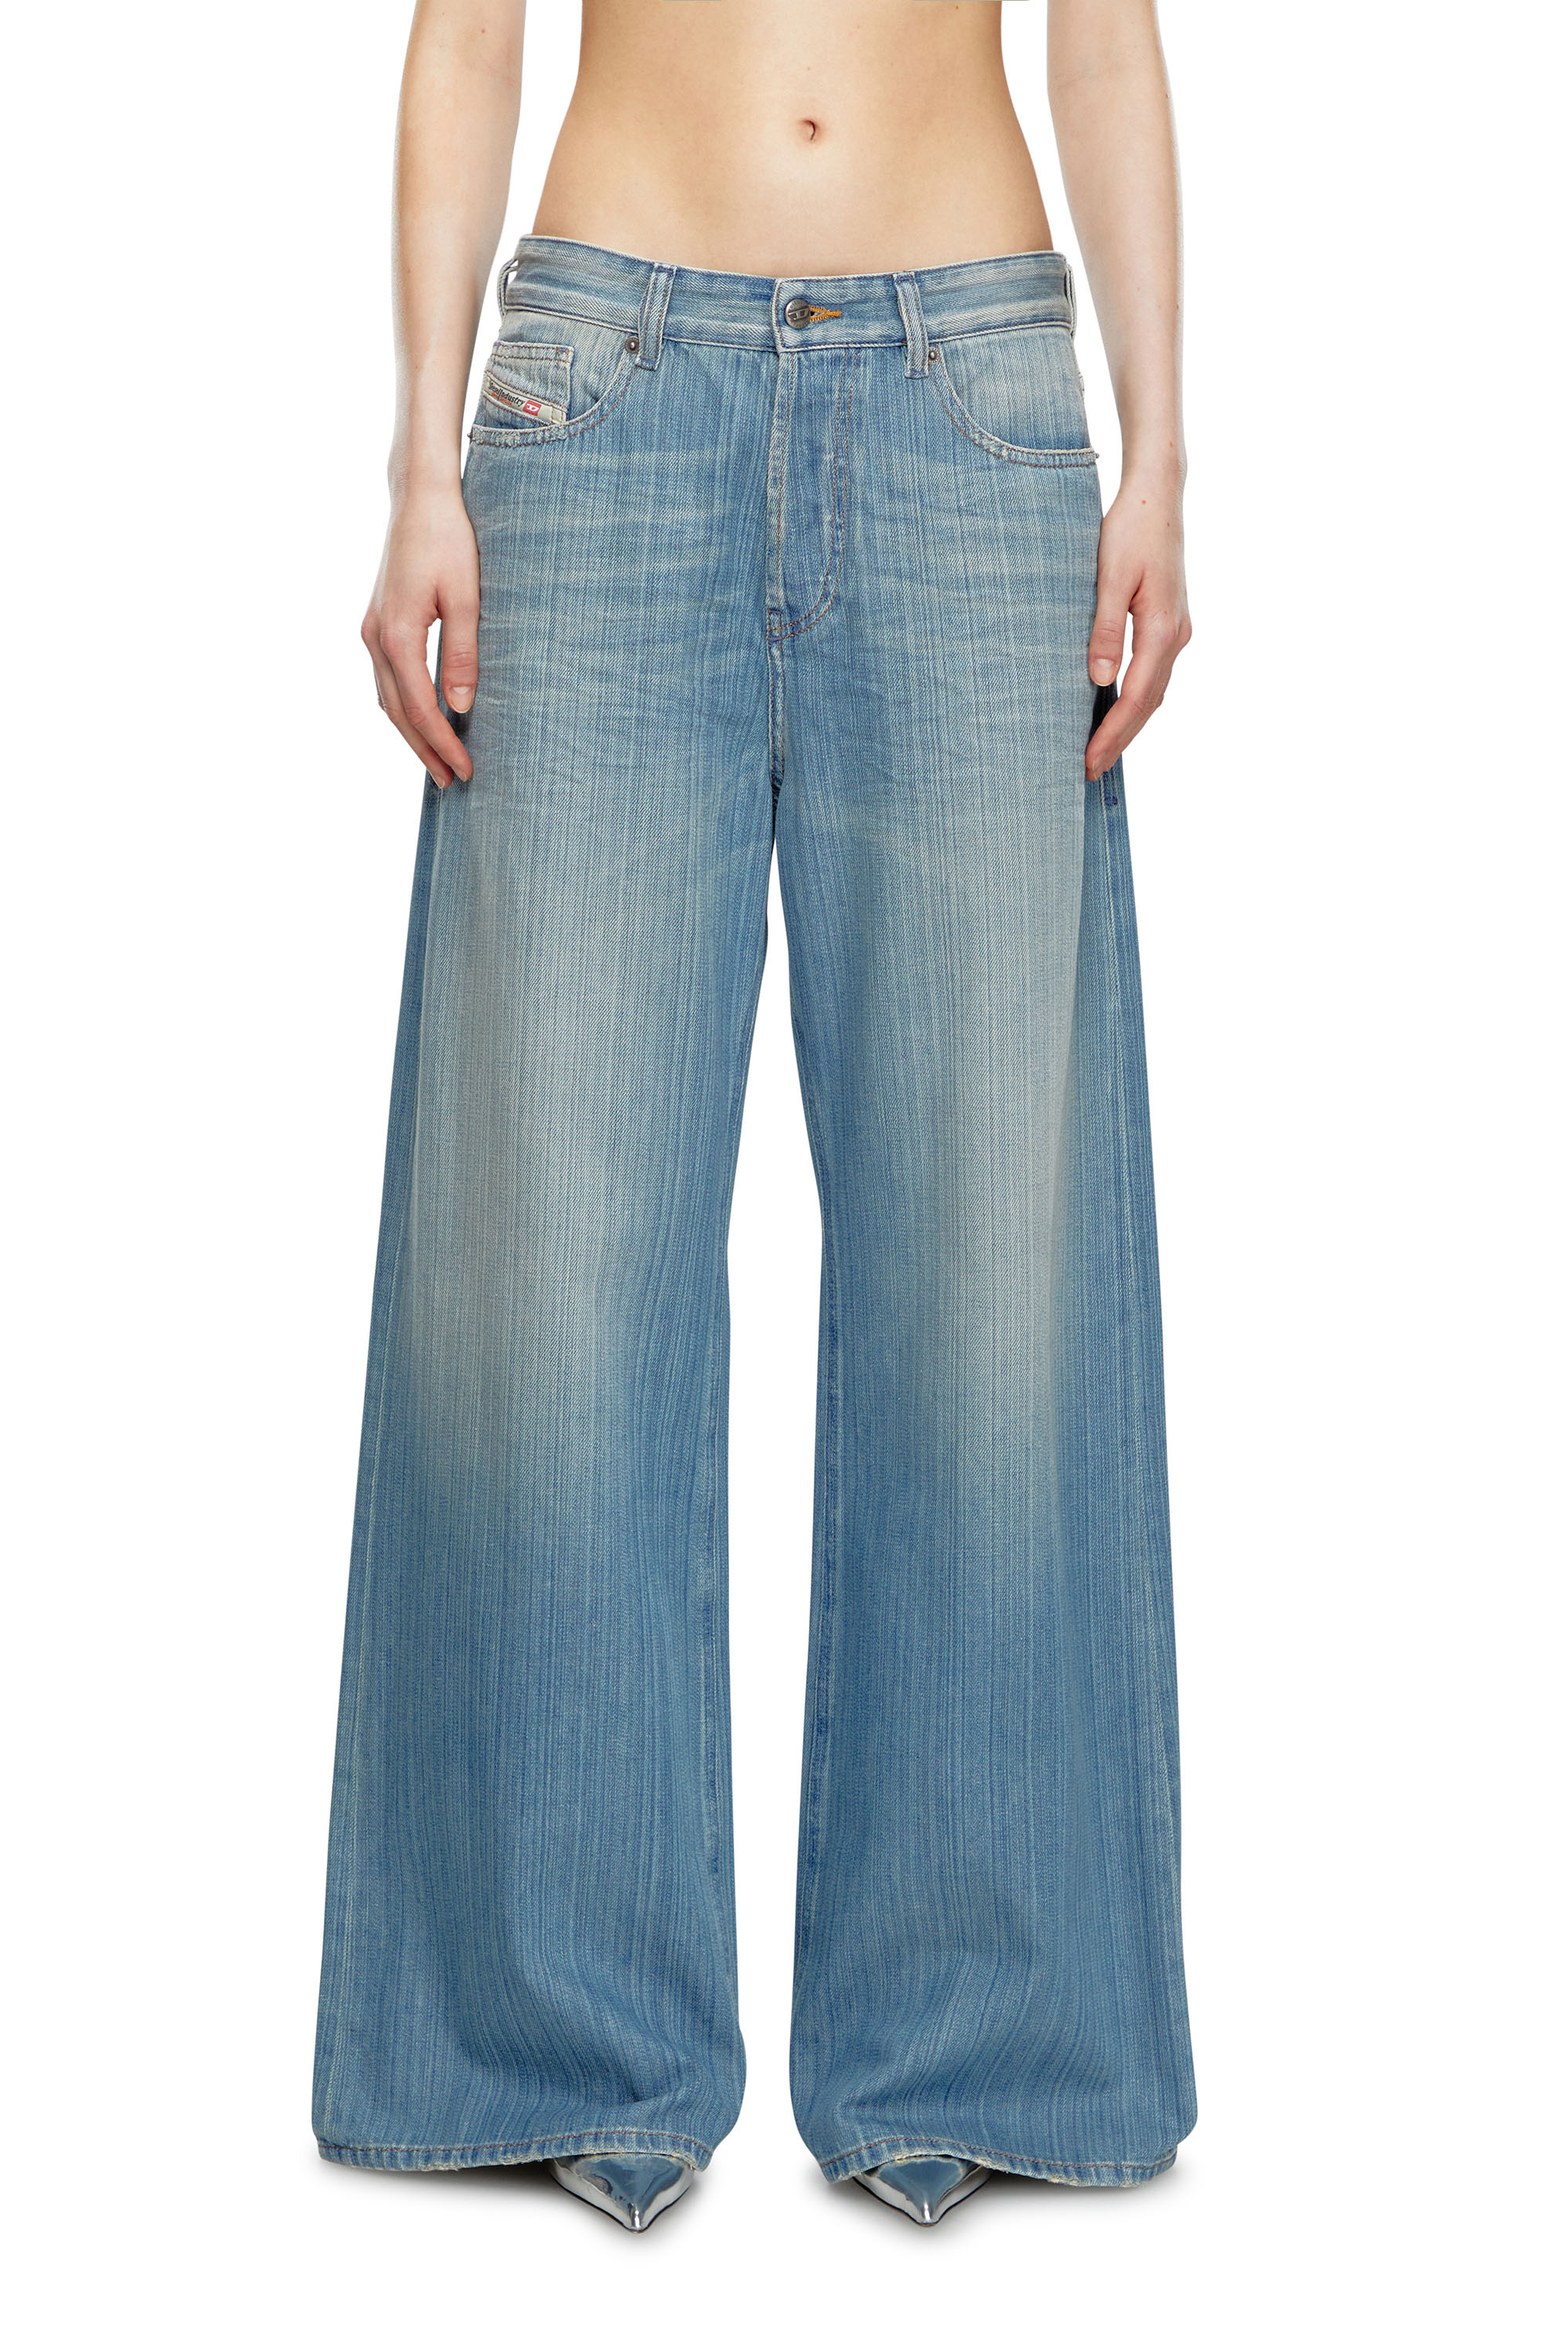 Diesel - Straight Jeans 1996 D-Sire 09J87, Mujer Straight Jeans - 1996 D-Sire in Azul marino - Image 2